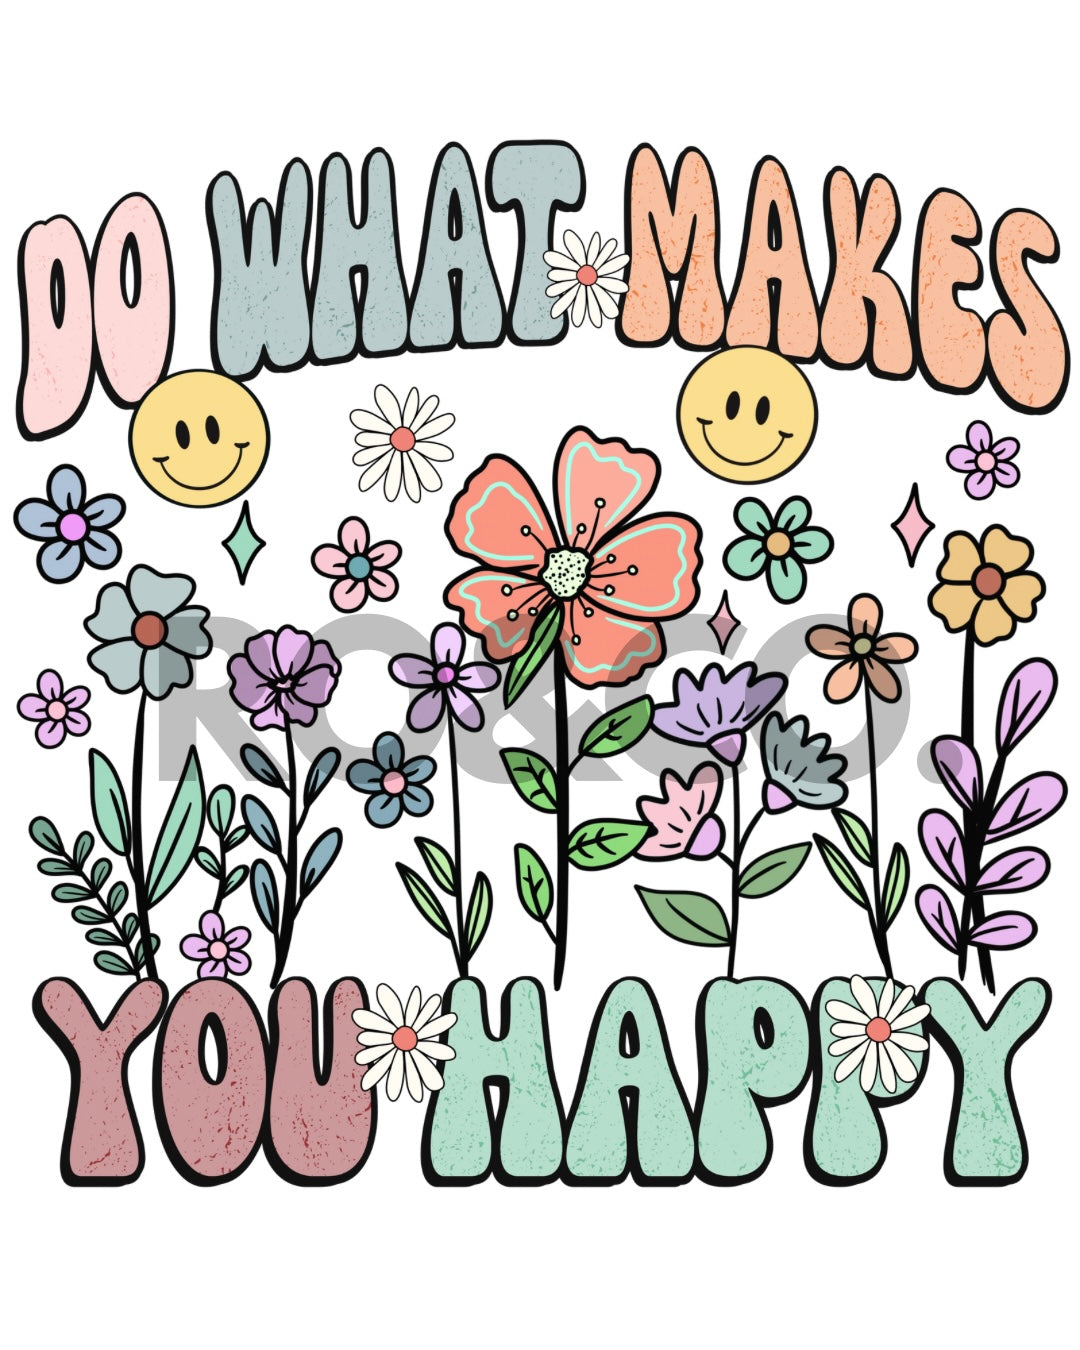 UVDTF - DO WHAT MAKES YOU HAPPY DECAL